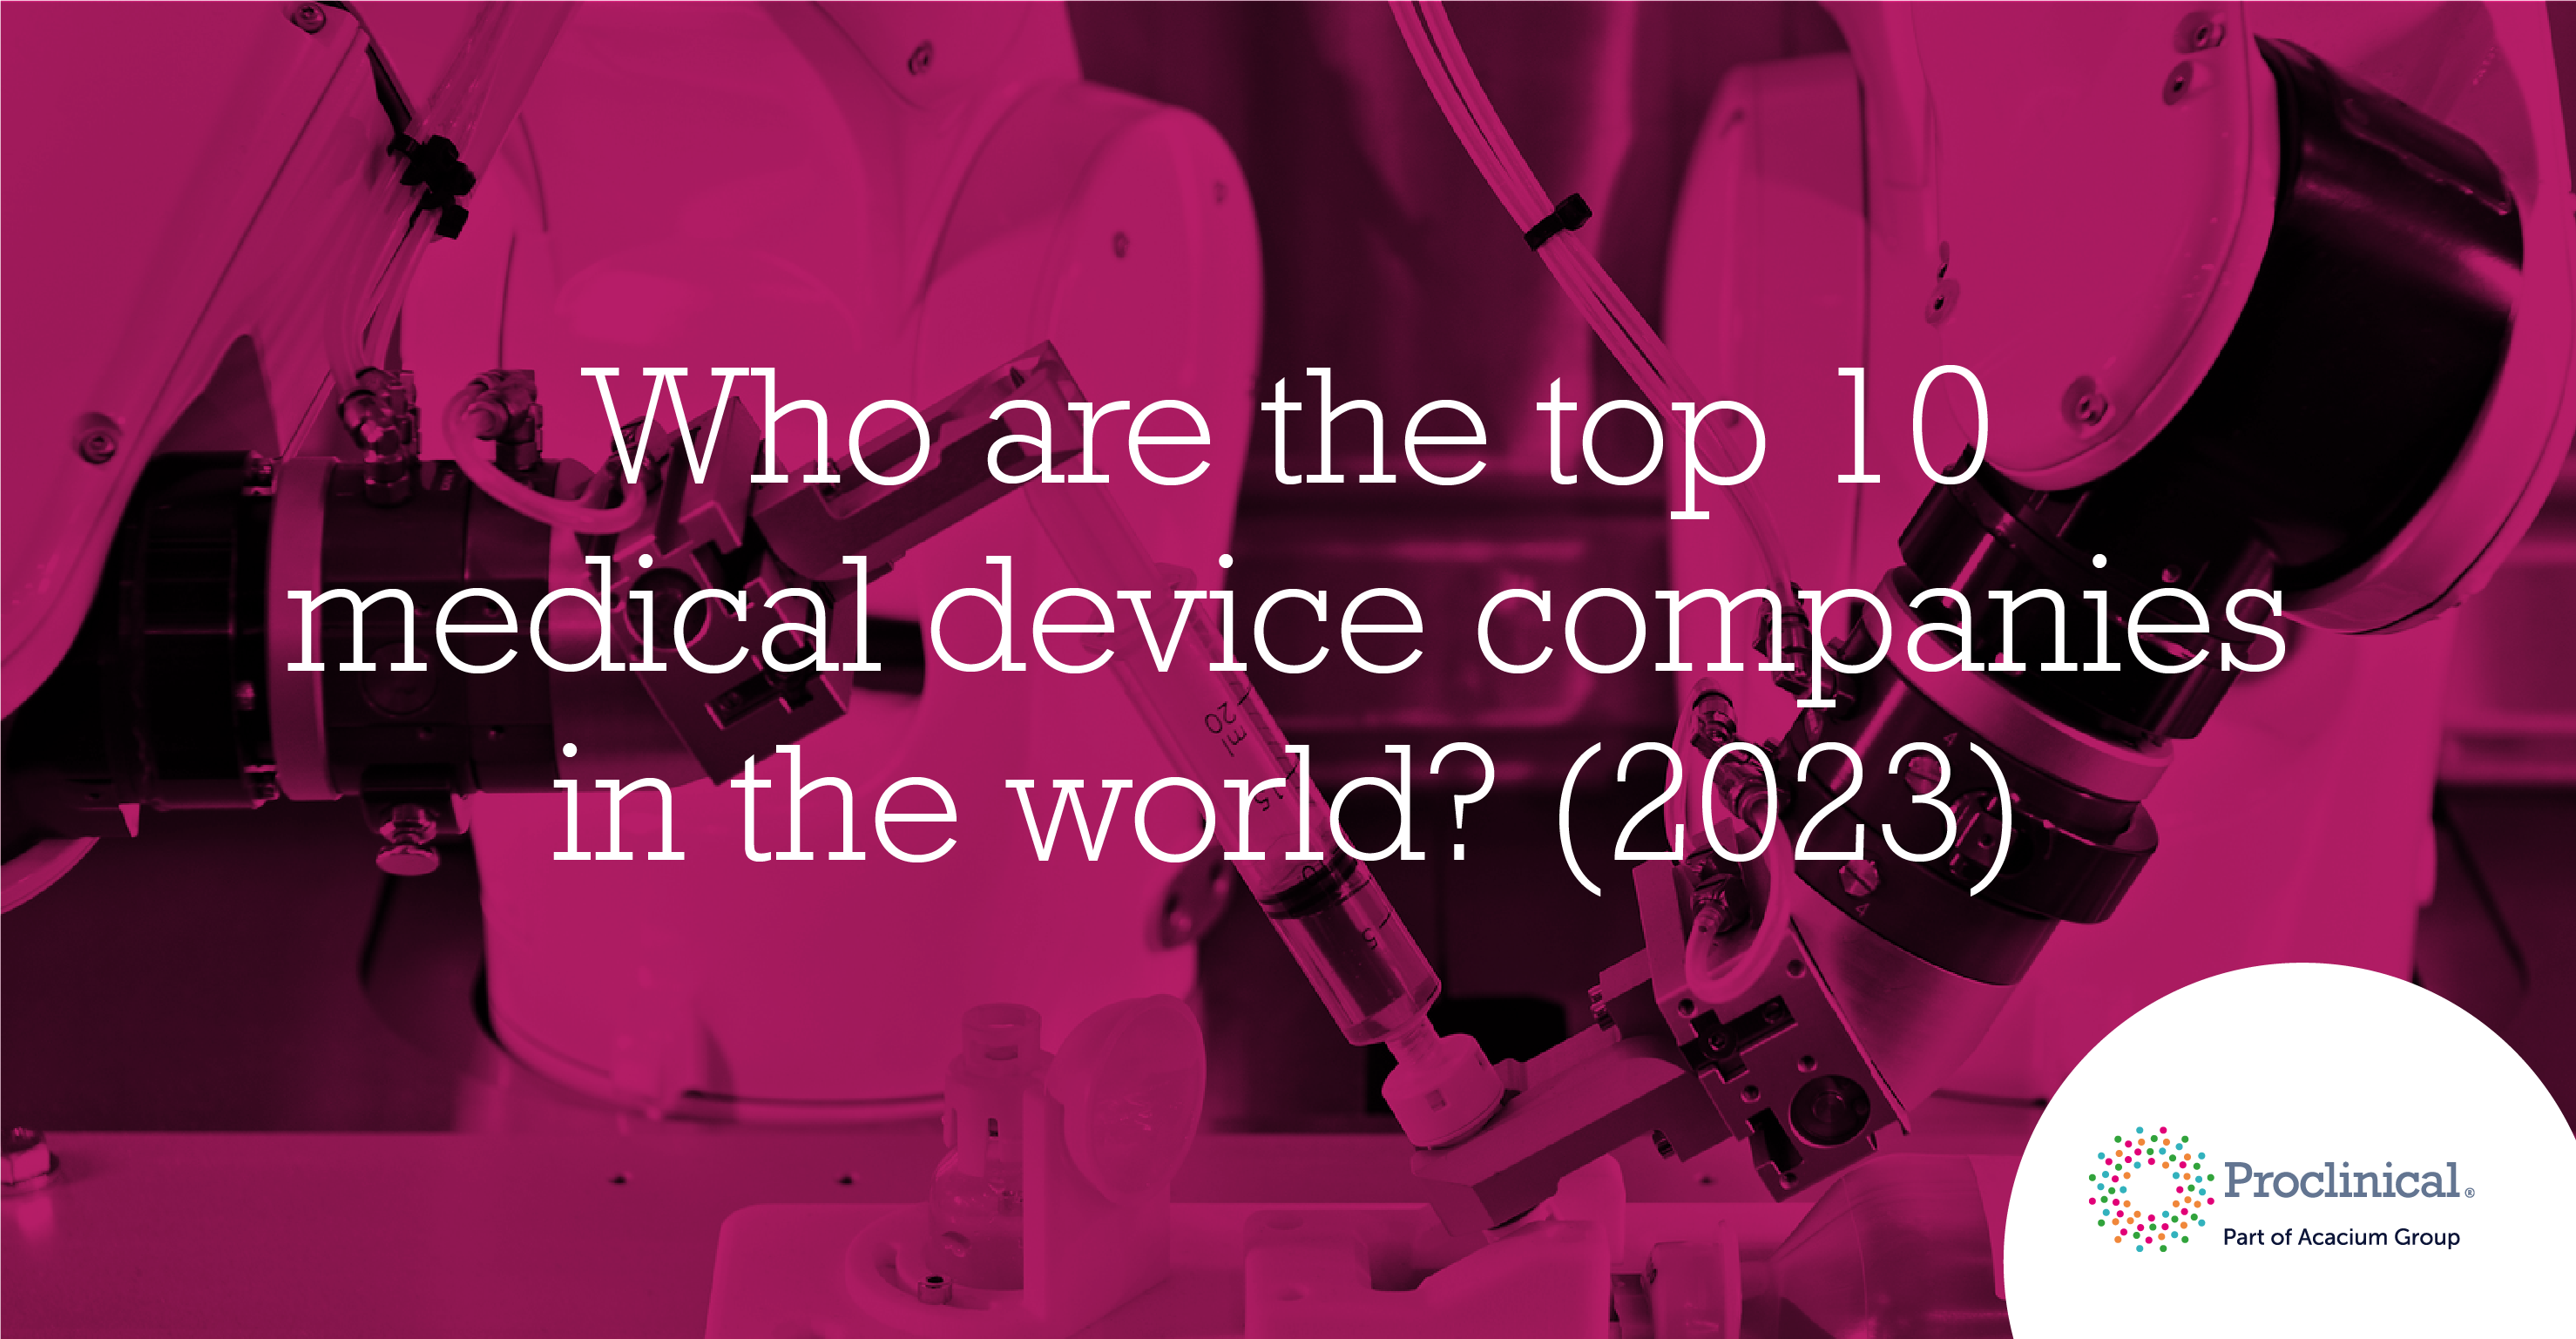 Who are the top 10 medical device companies in the world in 2023